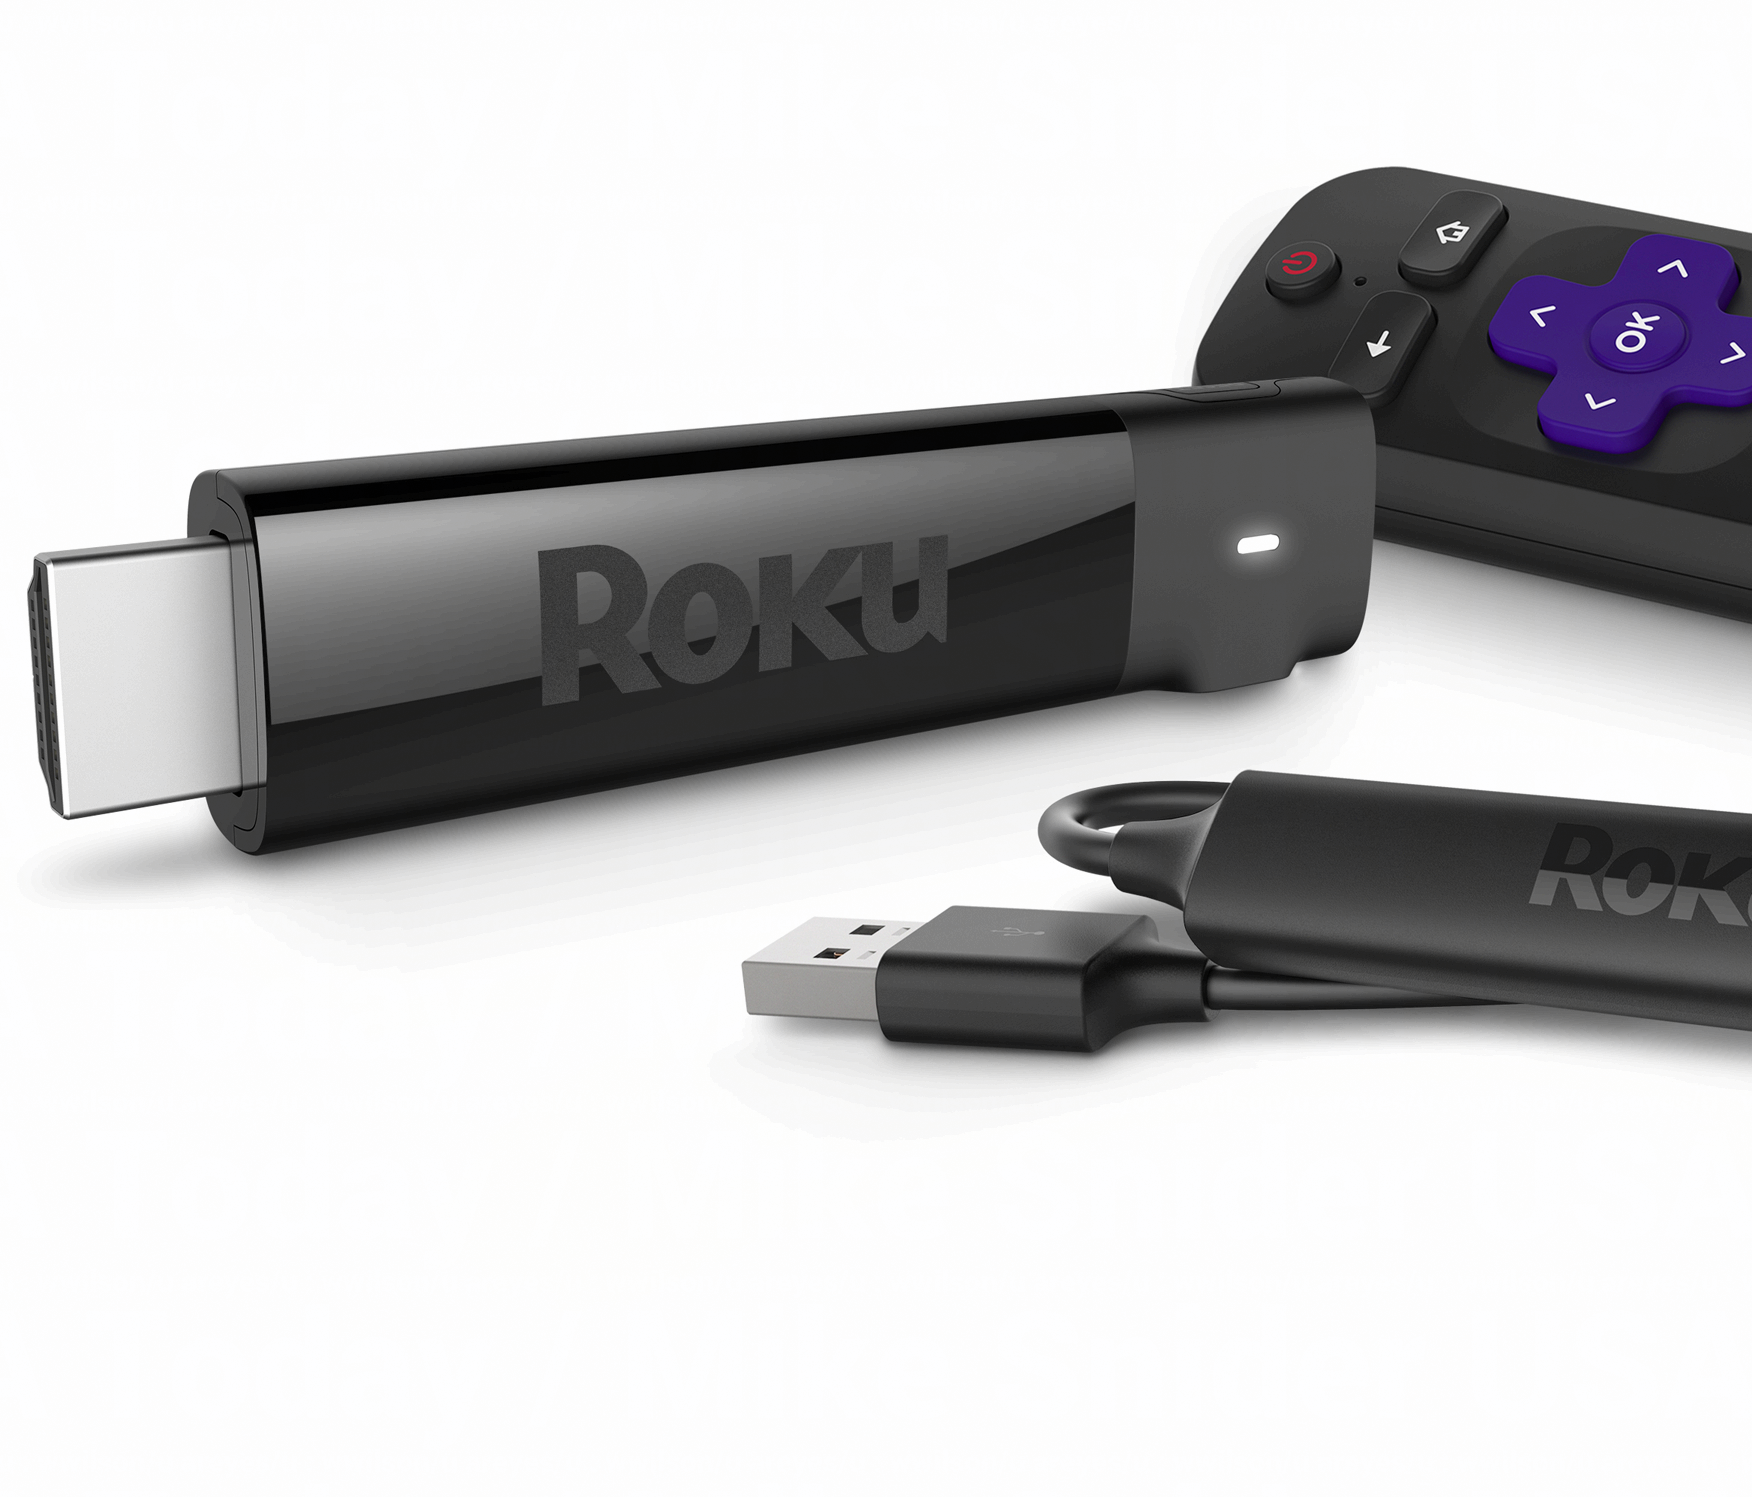 The Roku Streaming Stick+ has an advanced wireless receiver built into the power cord to improve its wireless range. It retails for $69.99.